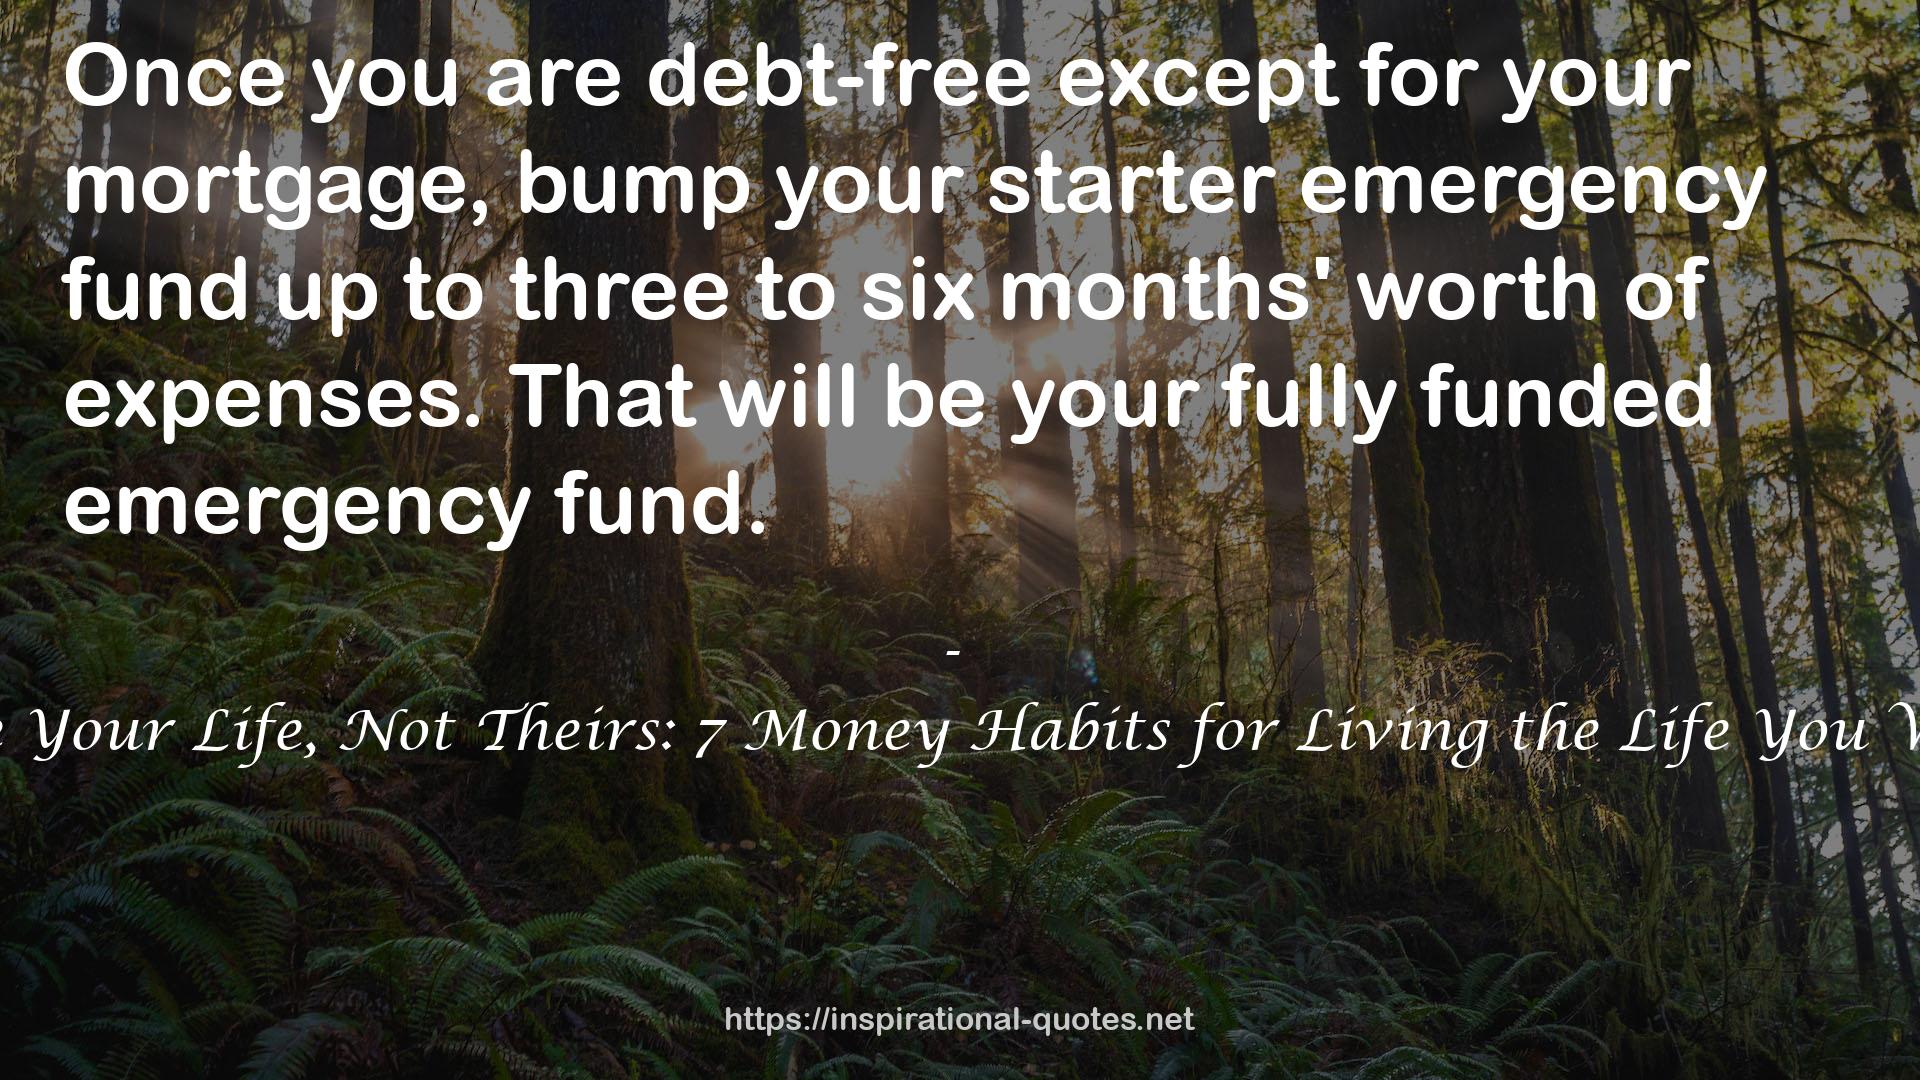 Love Your Life, Not Theirs: 7 Money Habits for Living the Life You Want QUOTES